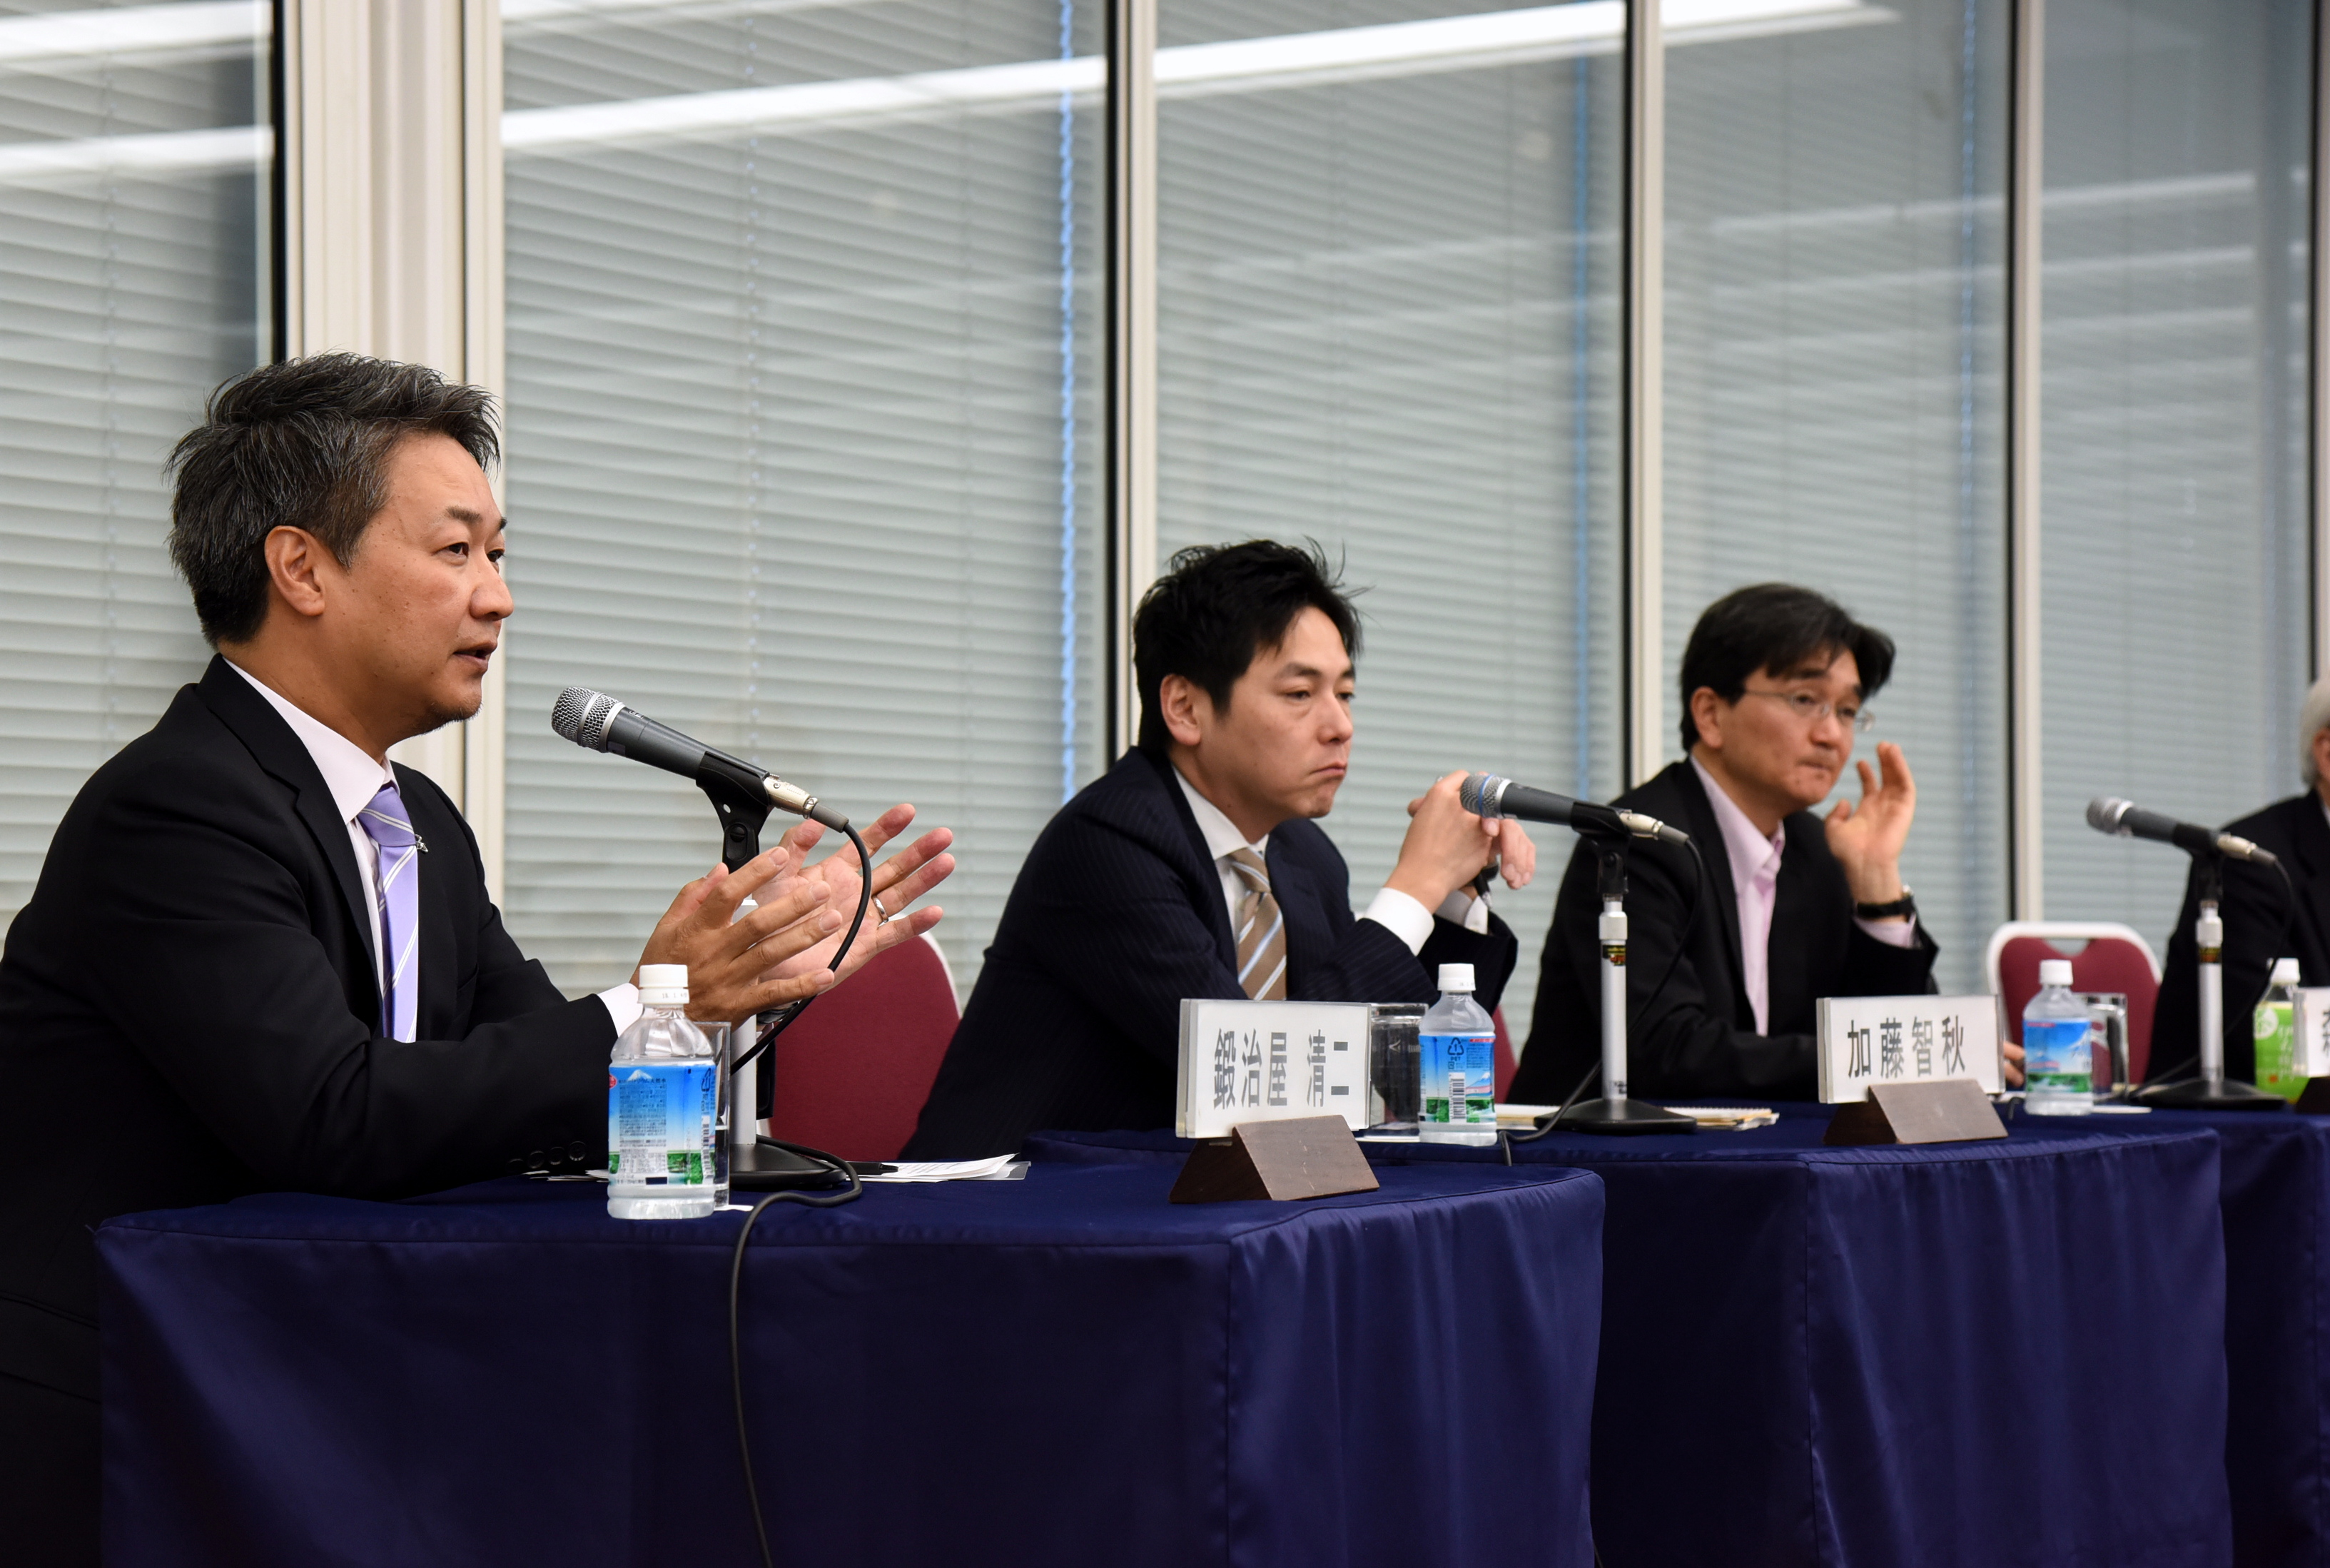 From left: Dassault Systemes K.K. Managing Director Seiji Kajiya, McKinsey &amp; Company's Chiaki Kato and the University of Tokyo's Hiroyuki Morikawa answer questions from a moderator and audience members at a symposium organized by the Keizai Koho Center, titled 'The Future of Industry (Industry 4.0) and Japan's Economic Growth,' in Tokyo on March 18. | SATOKO KAWASAKI